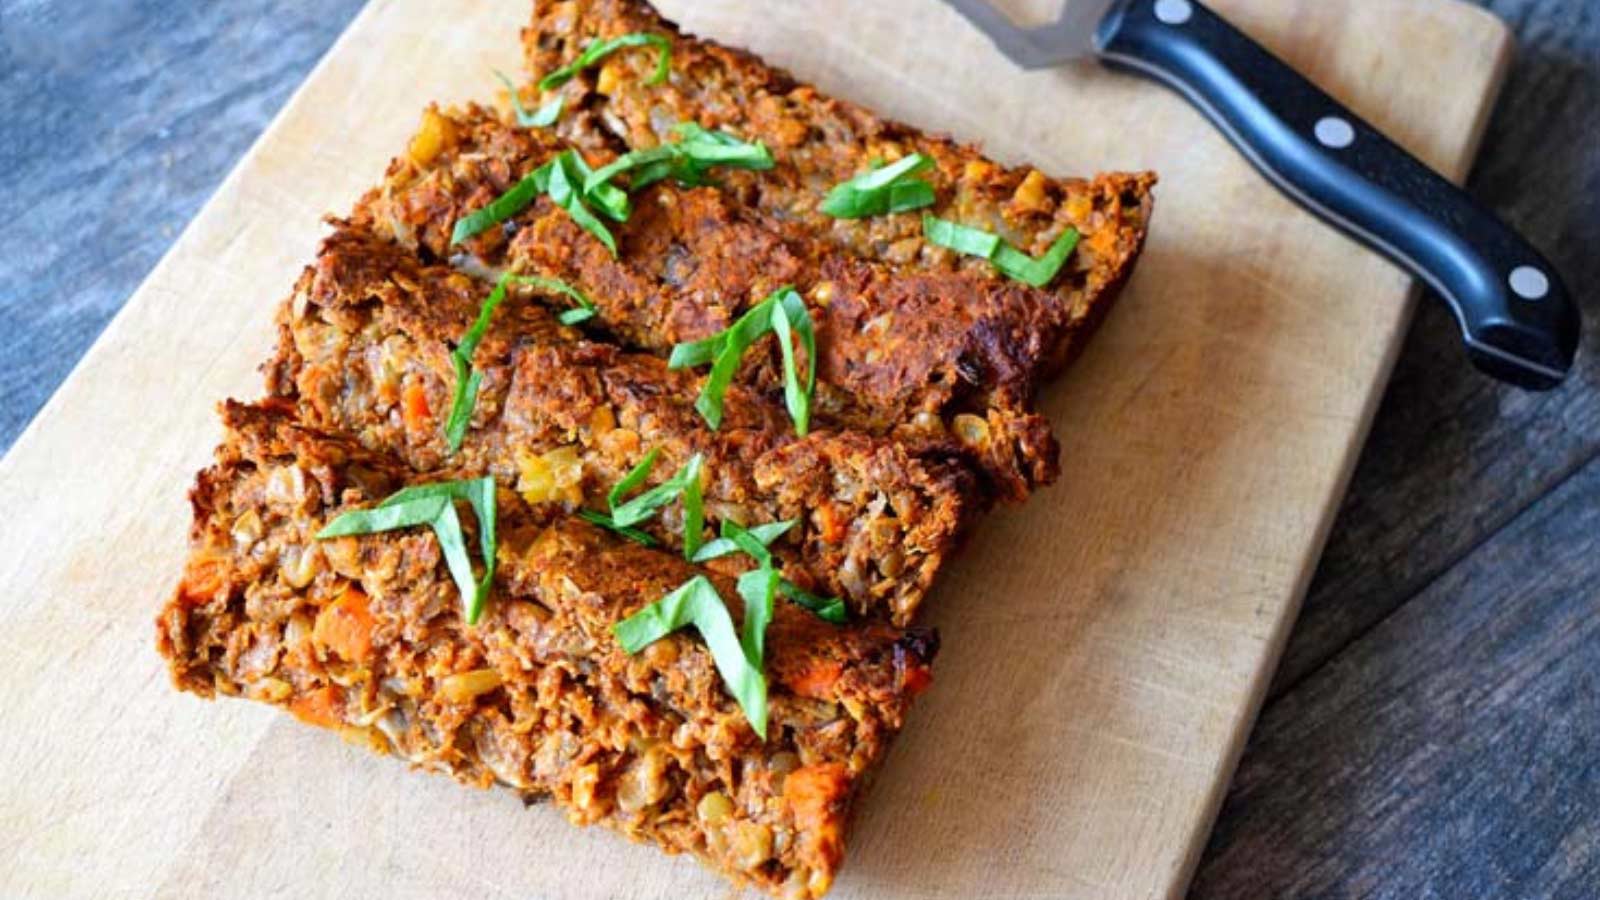 11 Delicious Meals You Can Make With Lentils